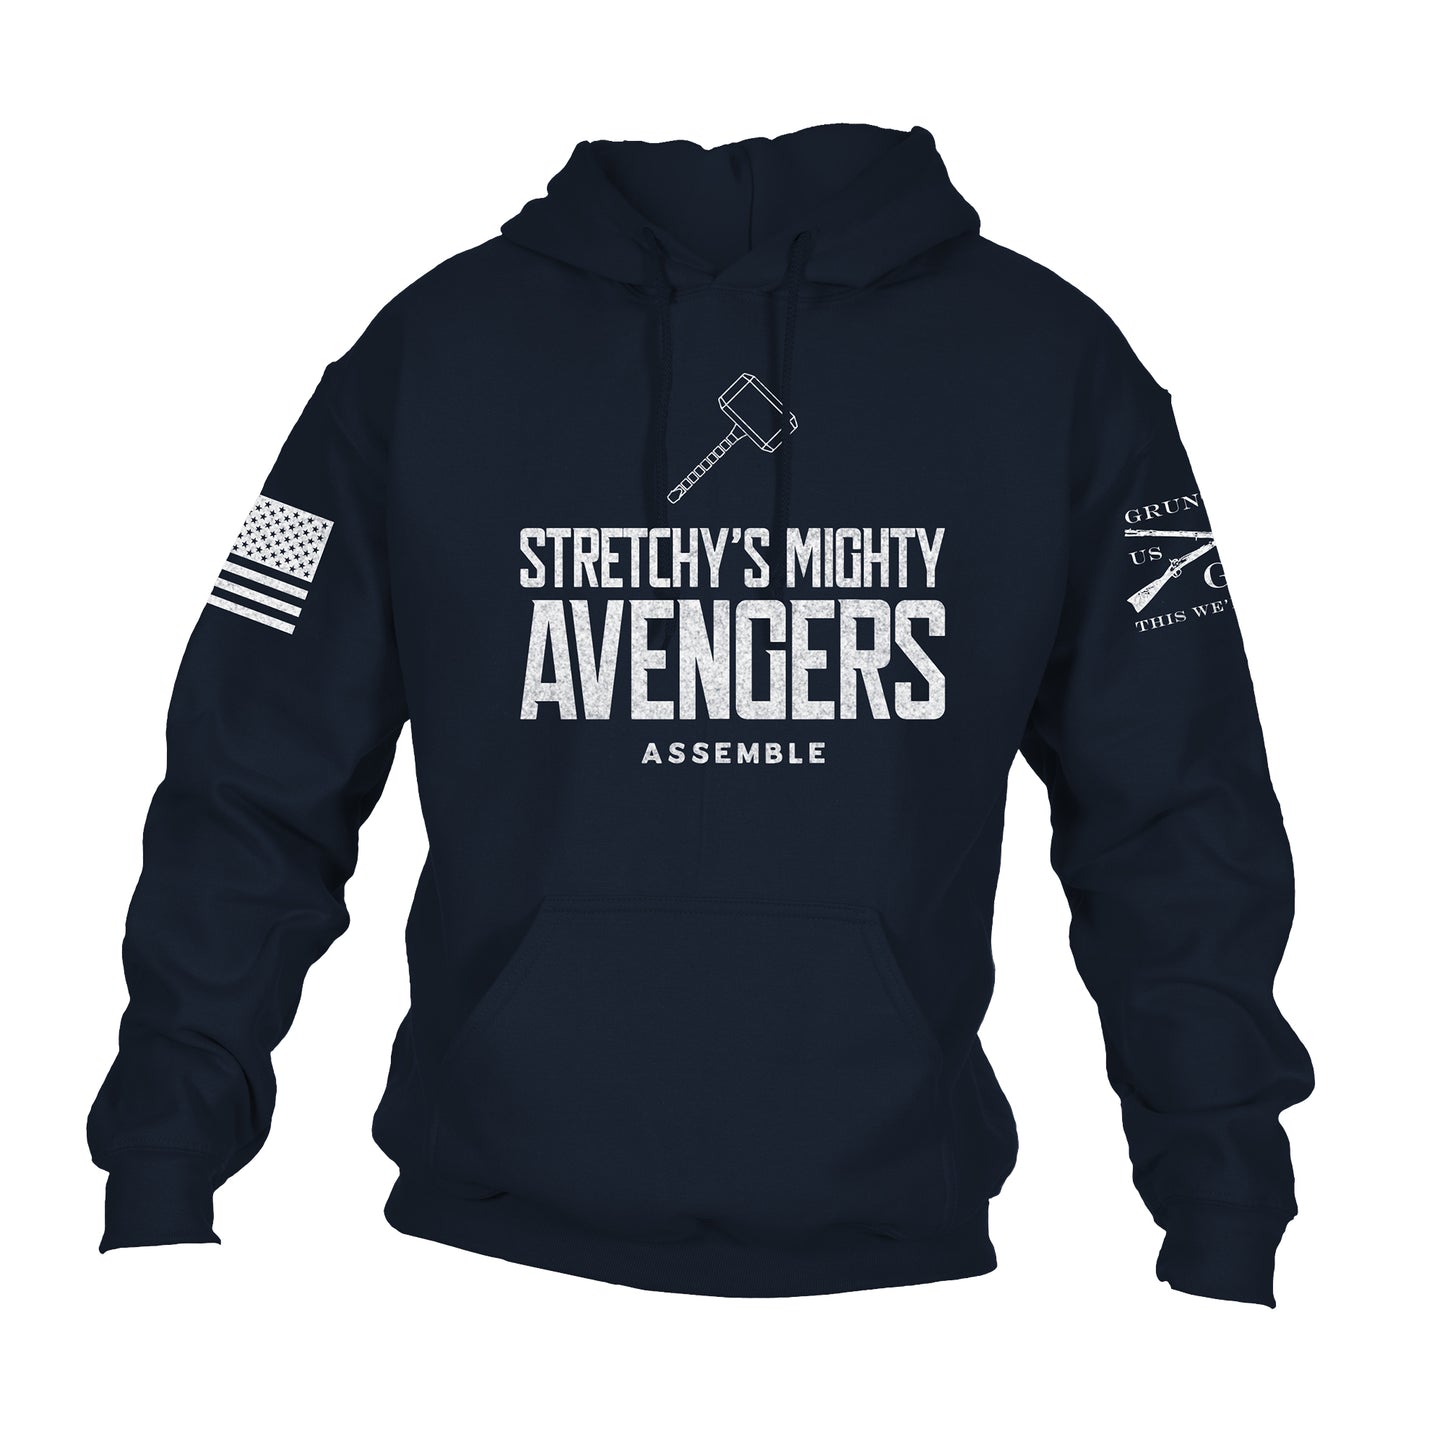 Stretchy’s Mighty Avengers Hoodie